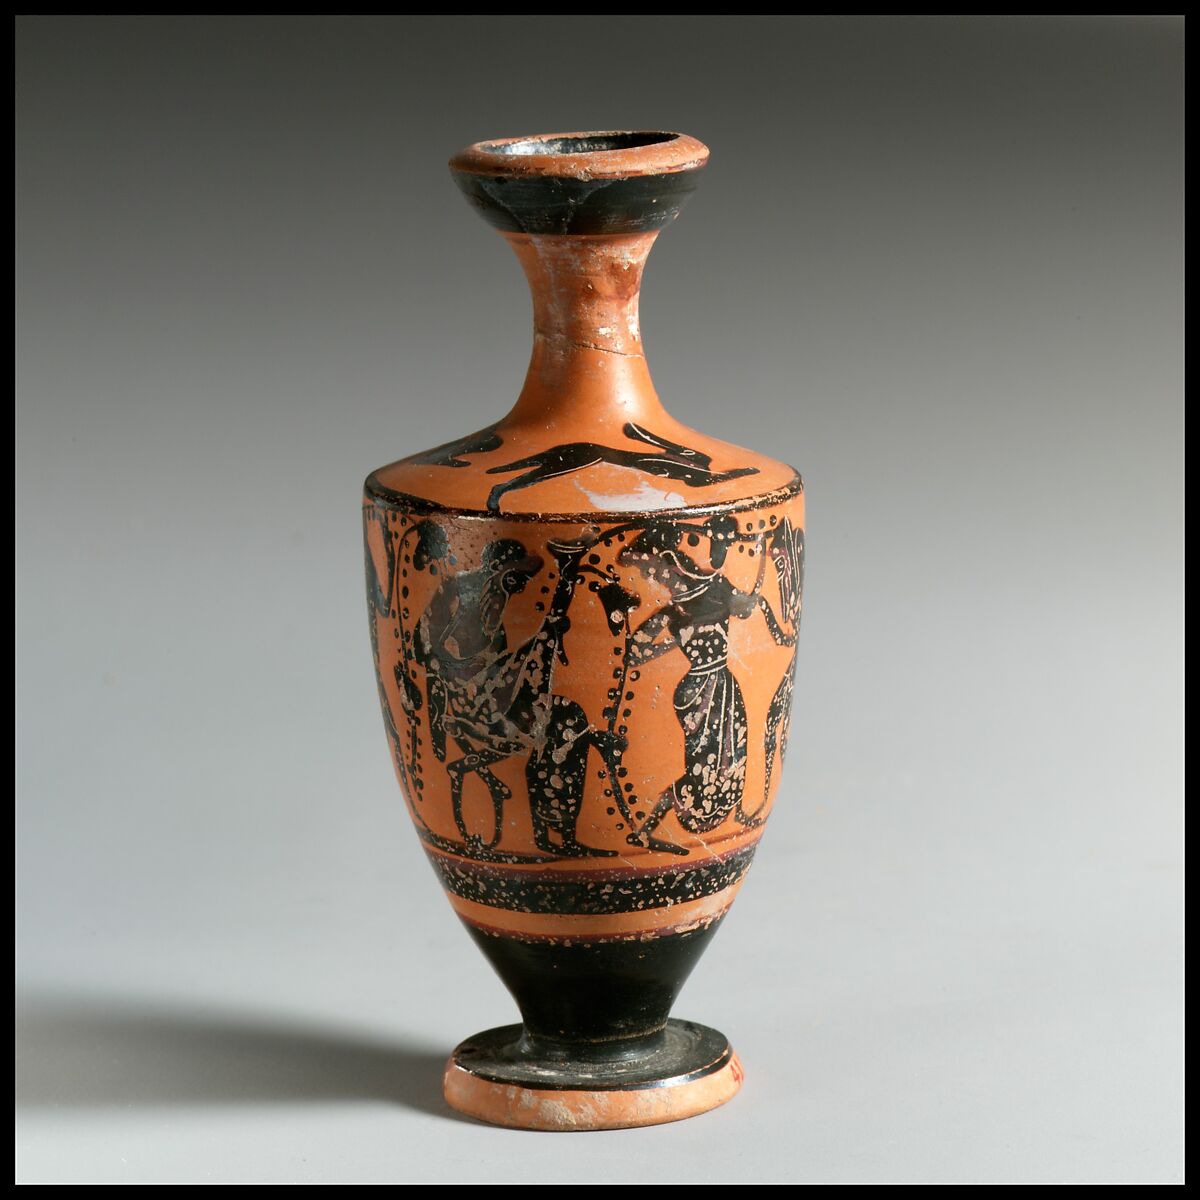 Lekythos, Attributed to the Class of Athens 581, Terracotta, Greek, Attic 